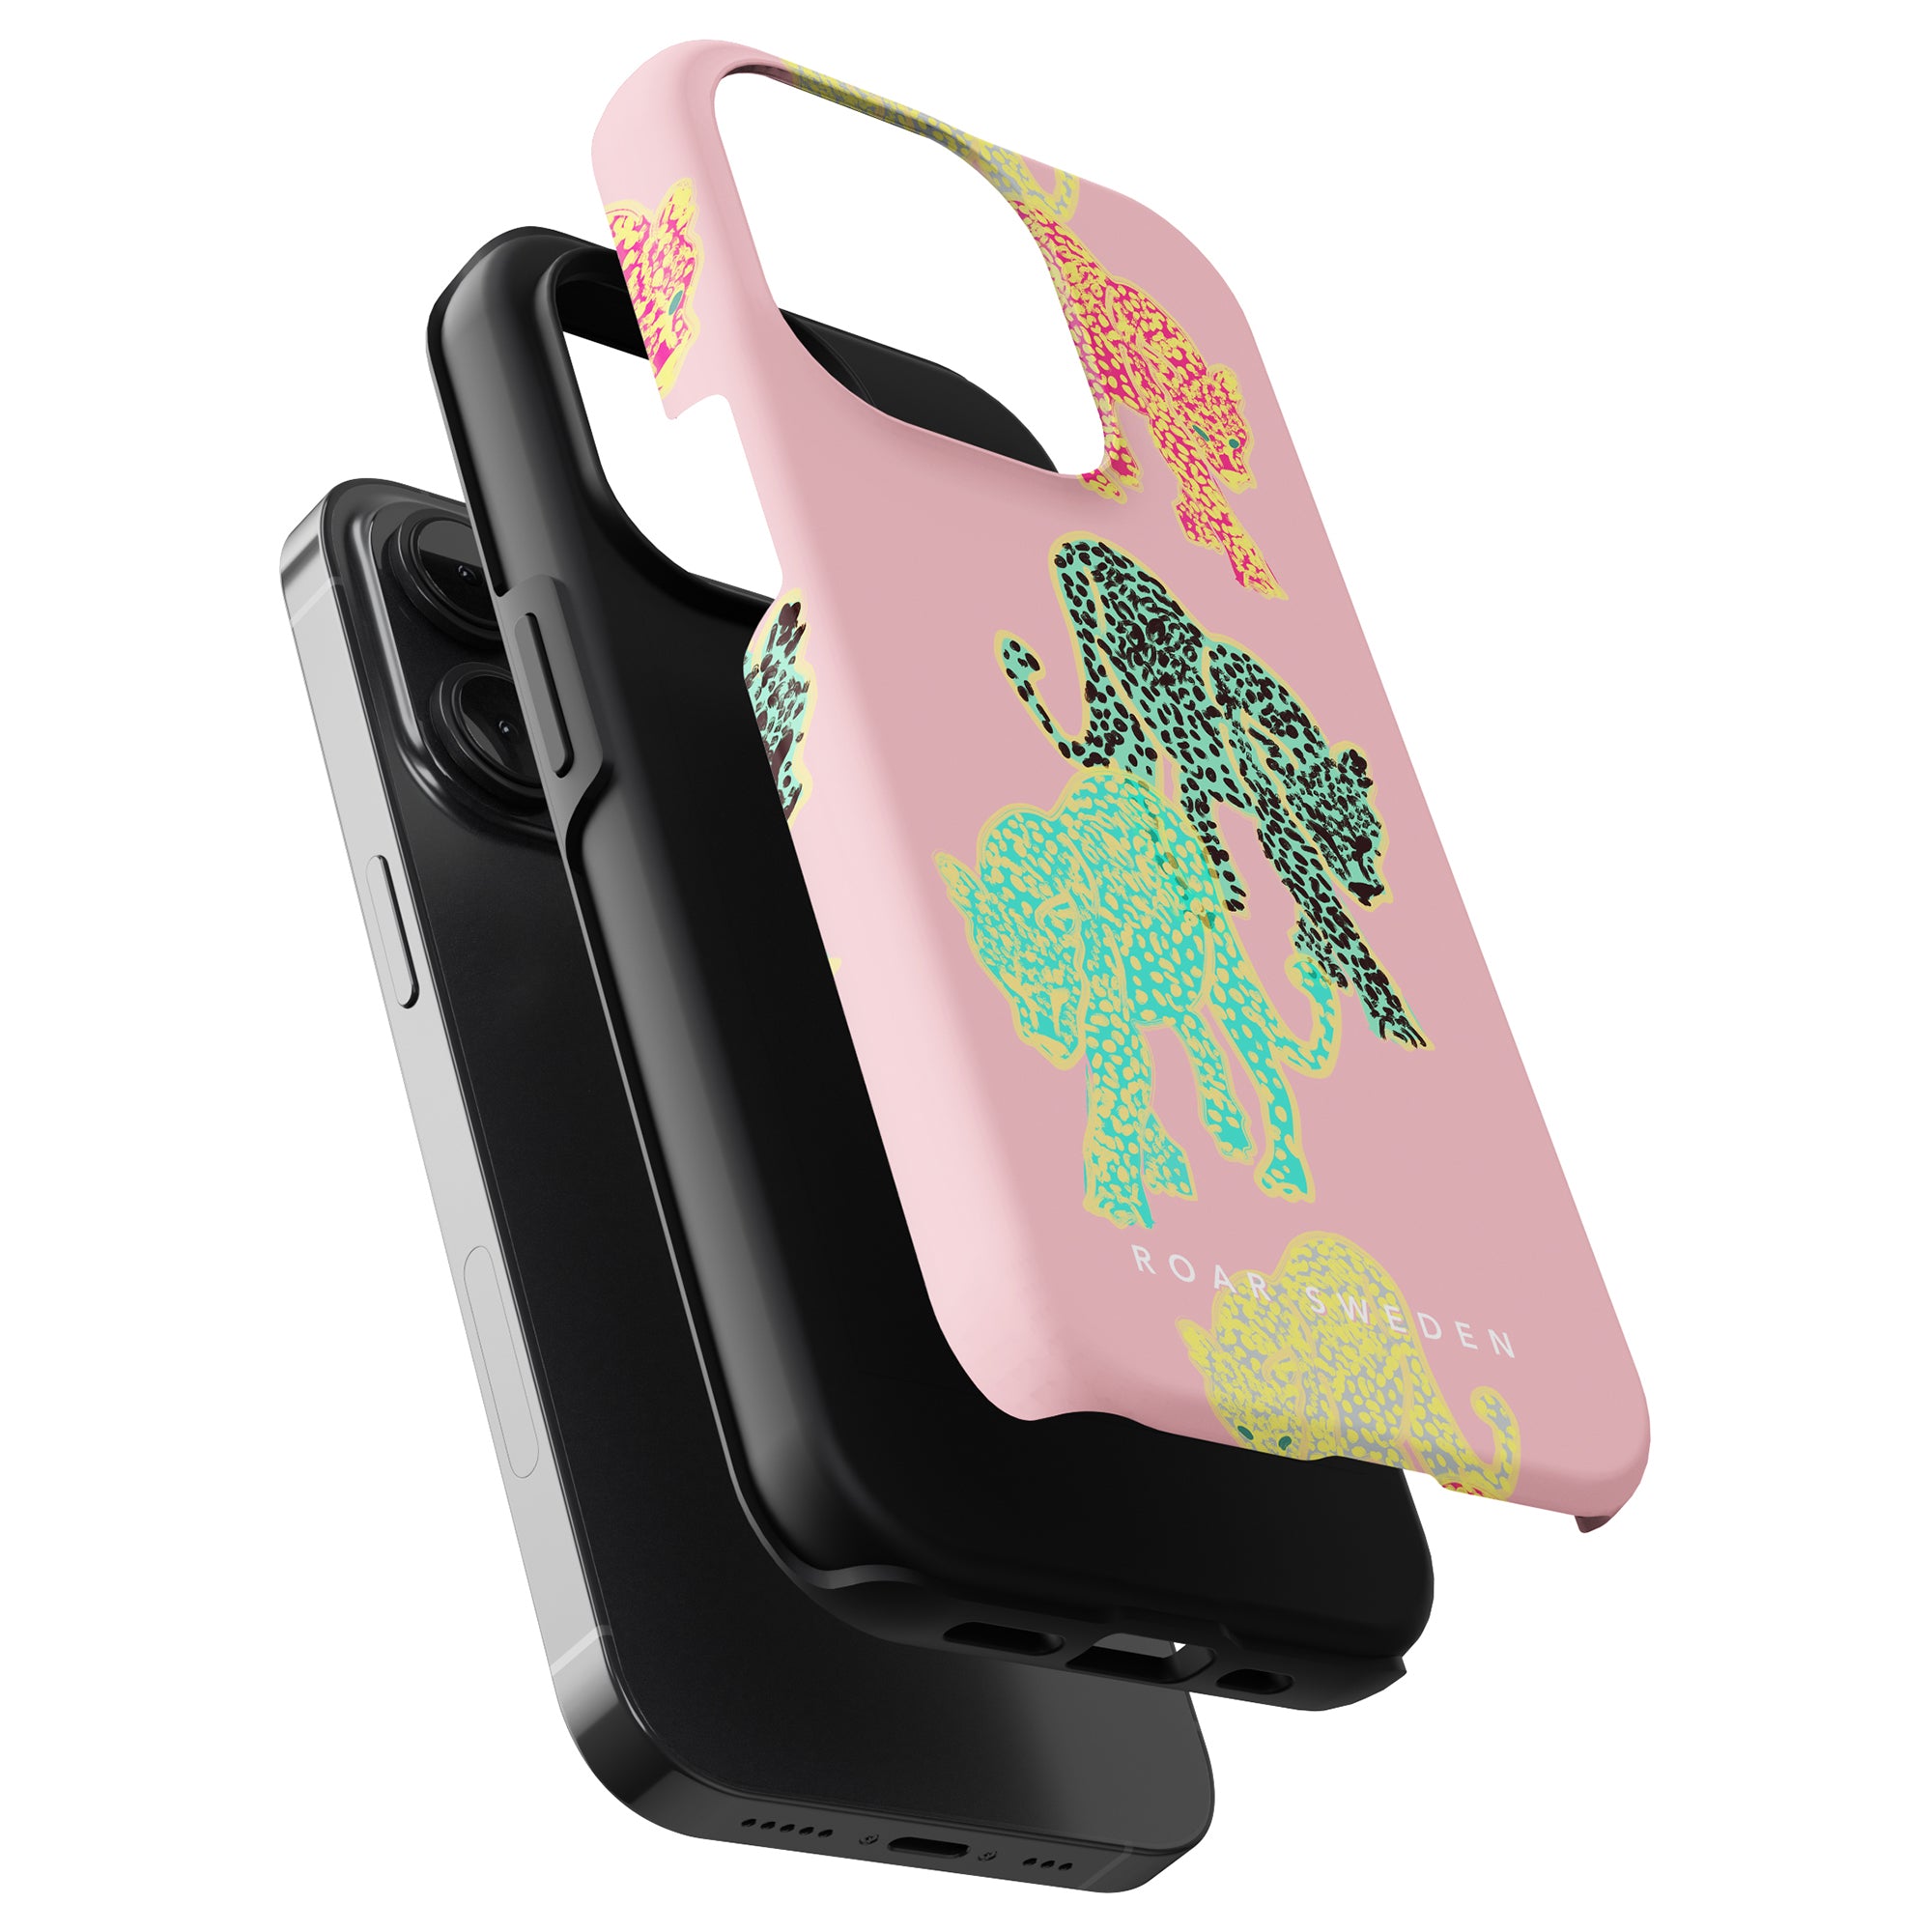 Two Meow - Tough Cases from the Leopard Kollektion, one black and one pink with a green and gold floral design, displayed in a stack, isolated on a white background.